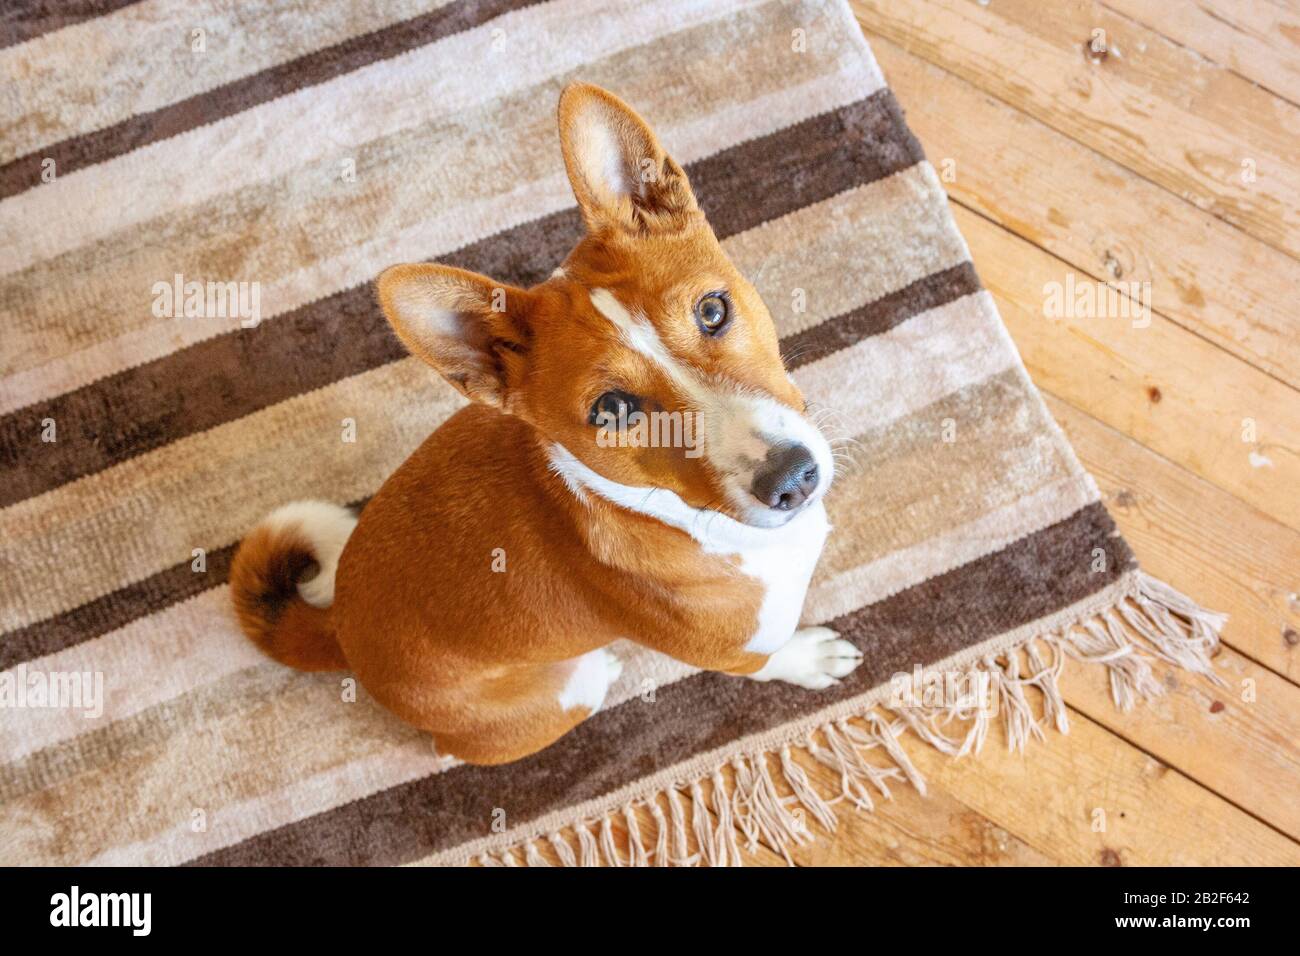 Basenji breed dog sitting on carpet wooden floor at home. Top view Stock Photo